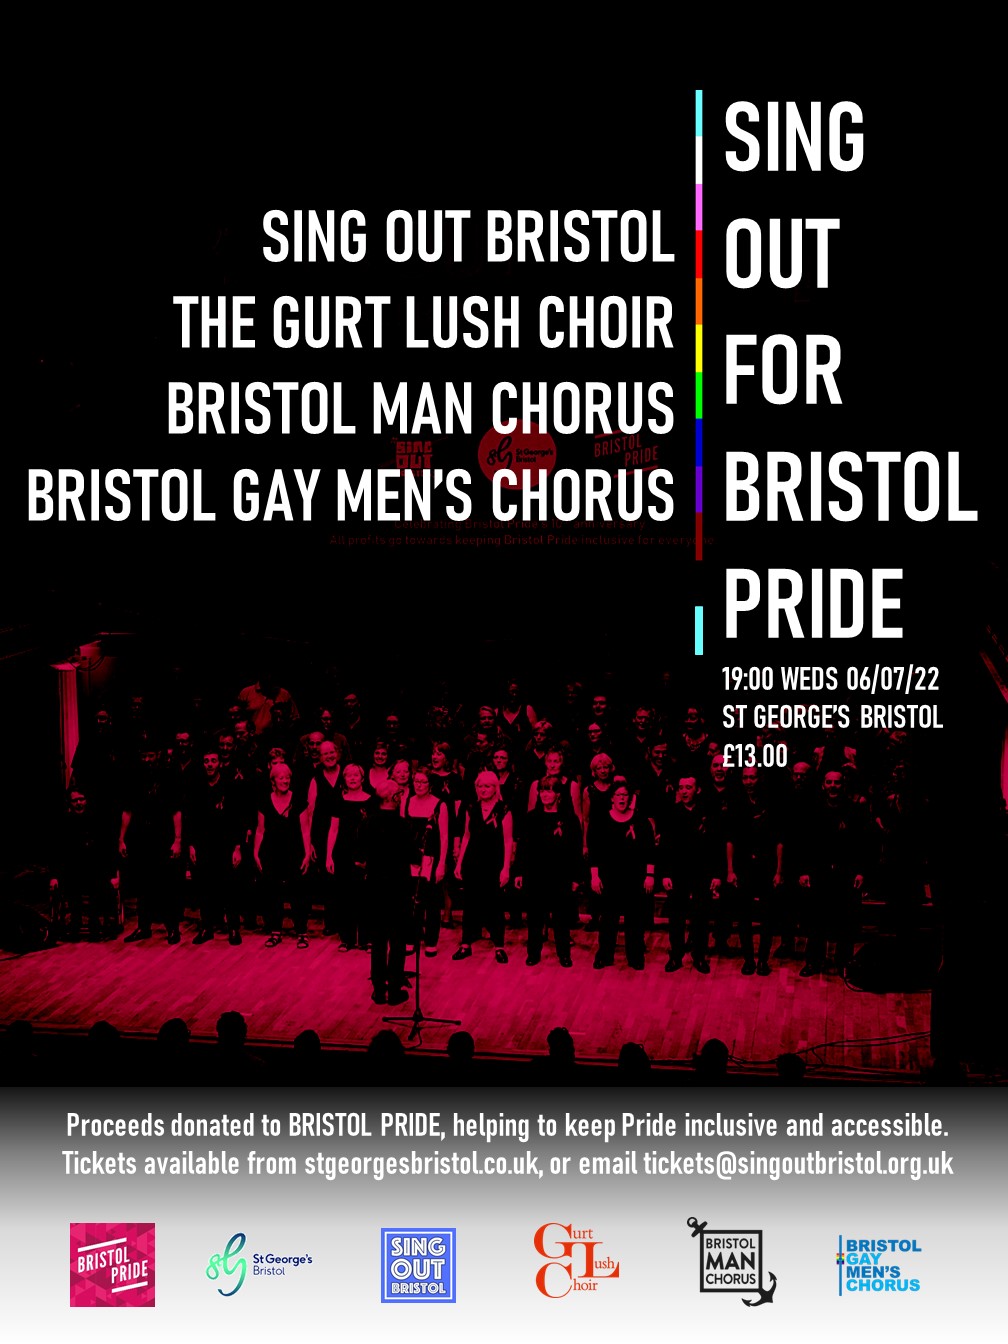 Sing Out For Bristol Pride 2022